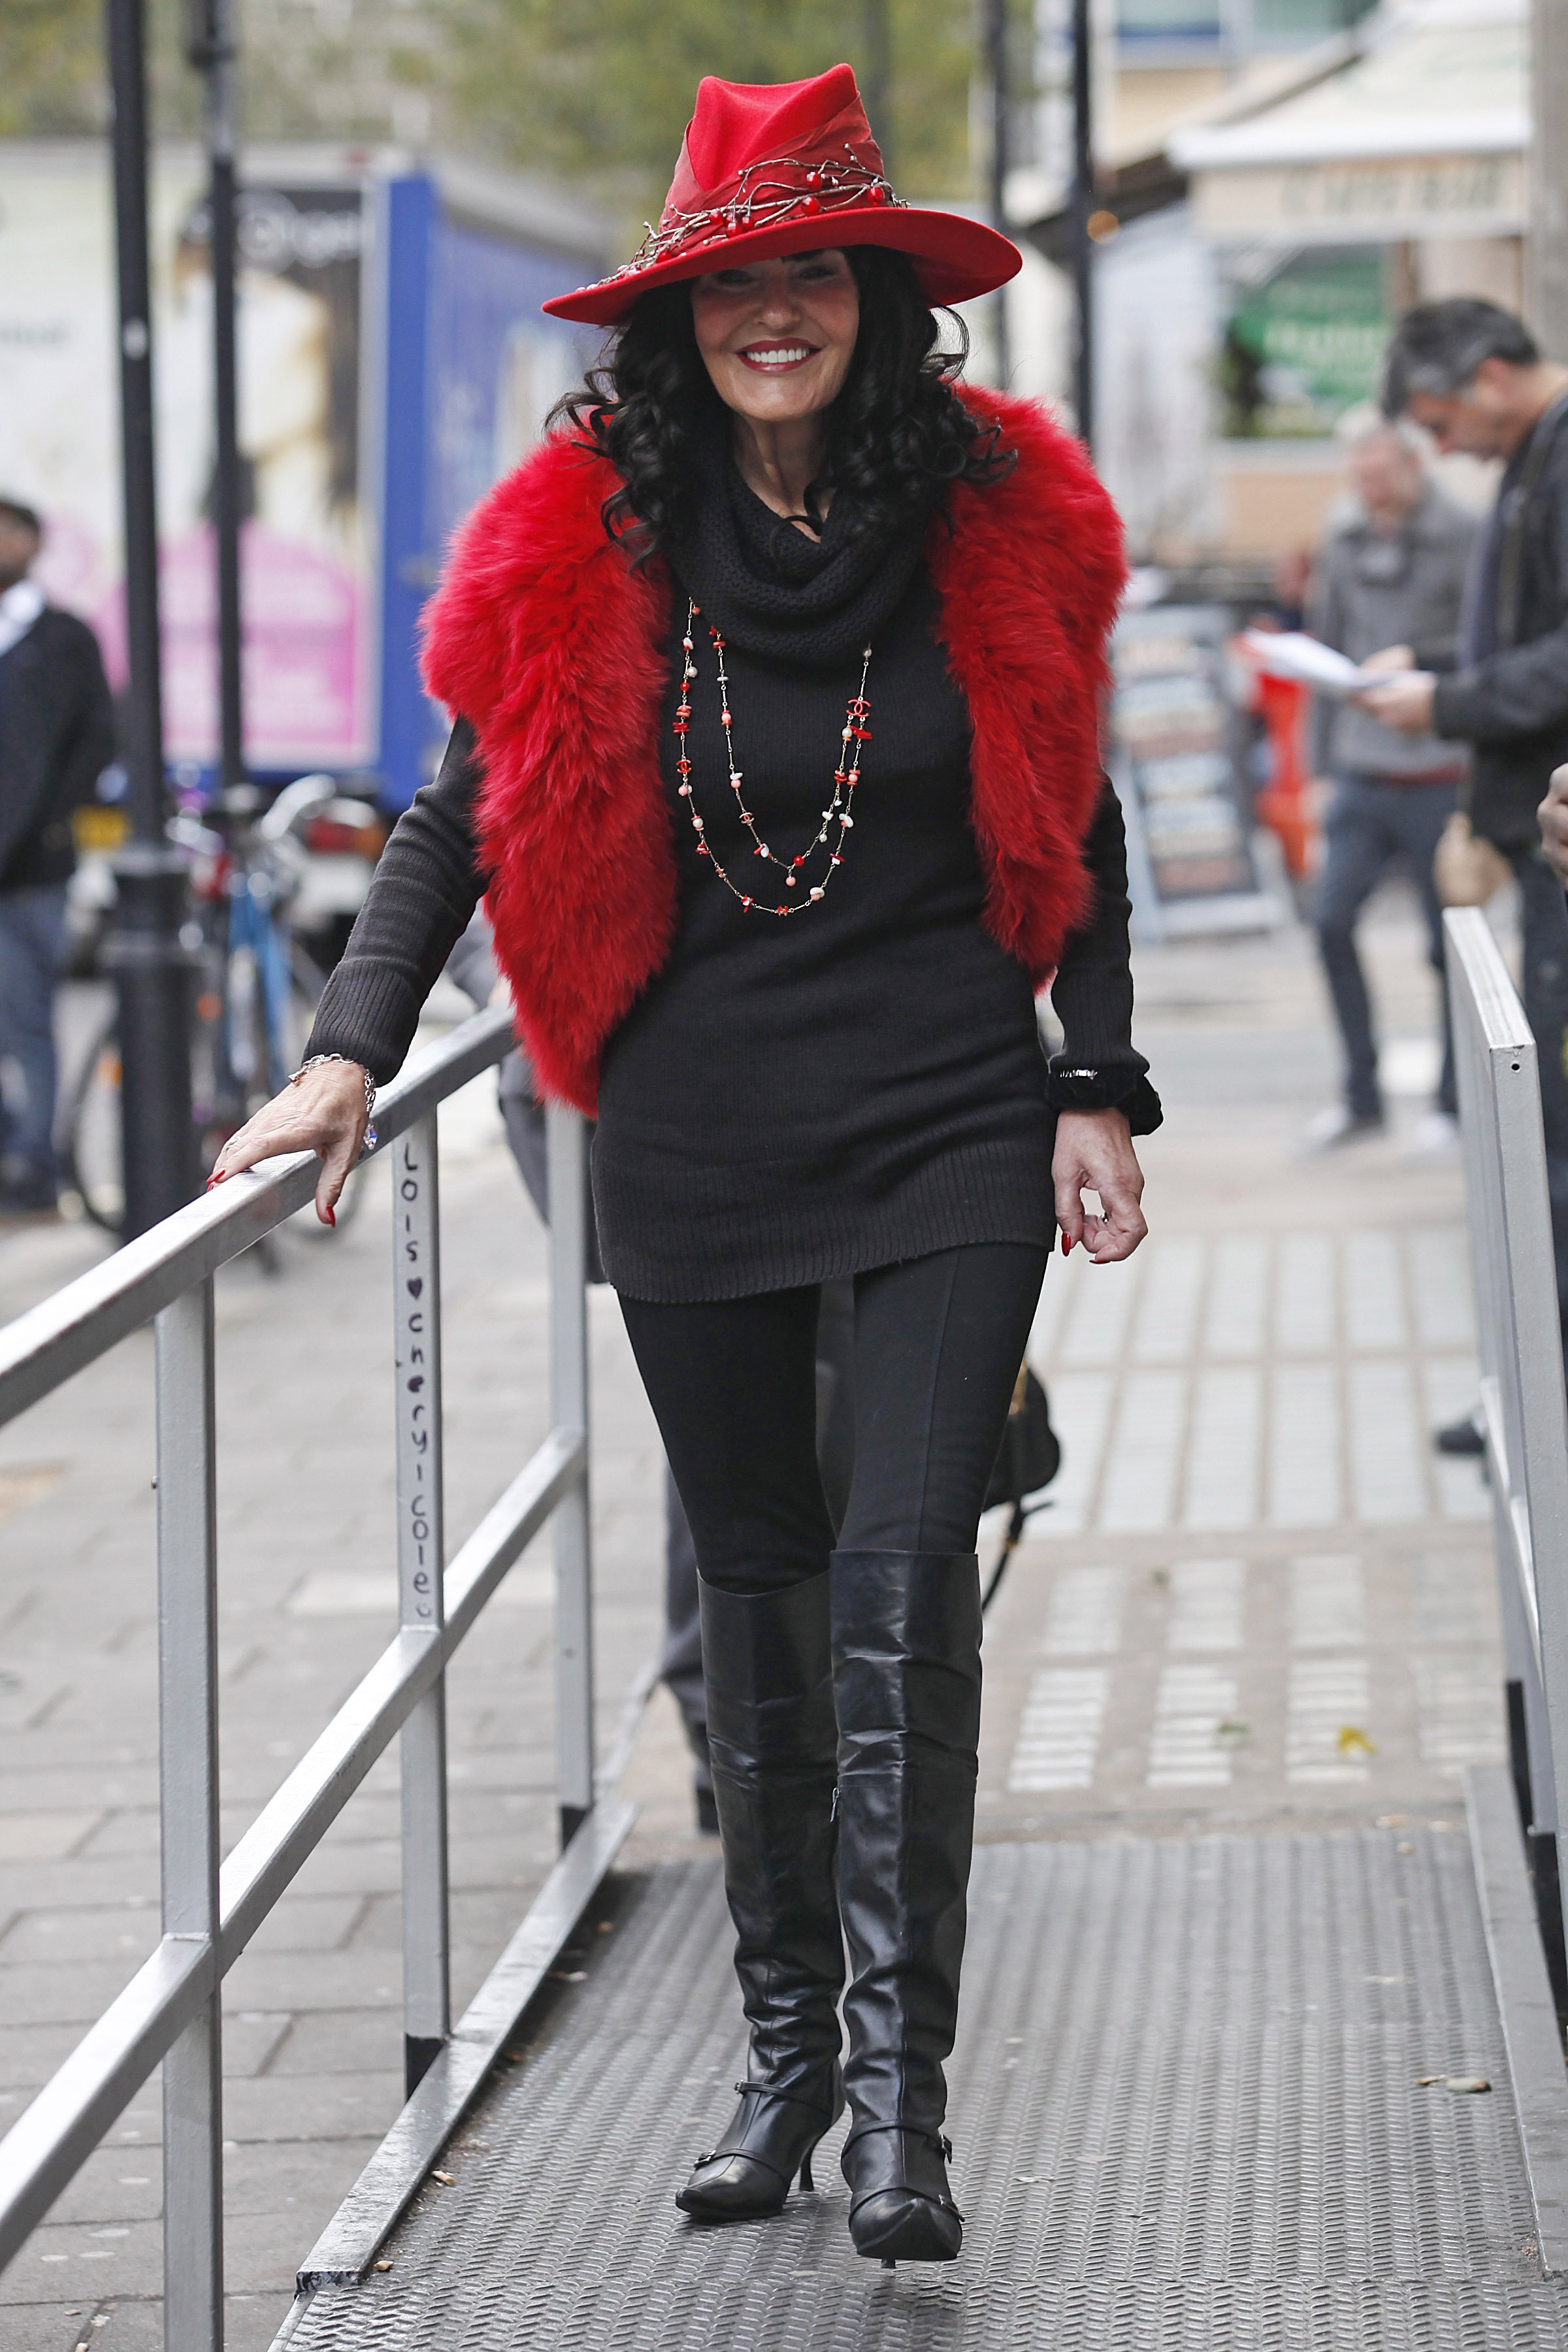 Hilary Devey spotted at BBC Radio One on December 7, 2011 in London, England. / Source: Getty Images